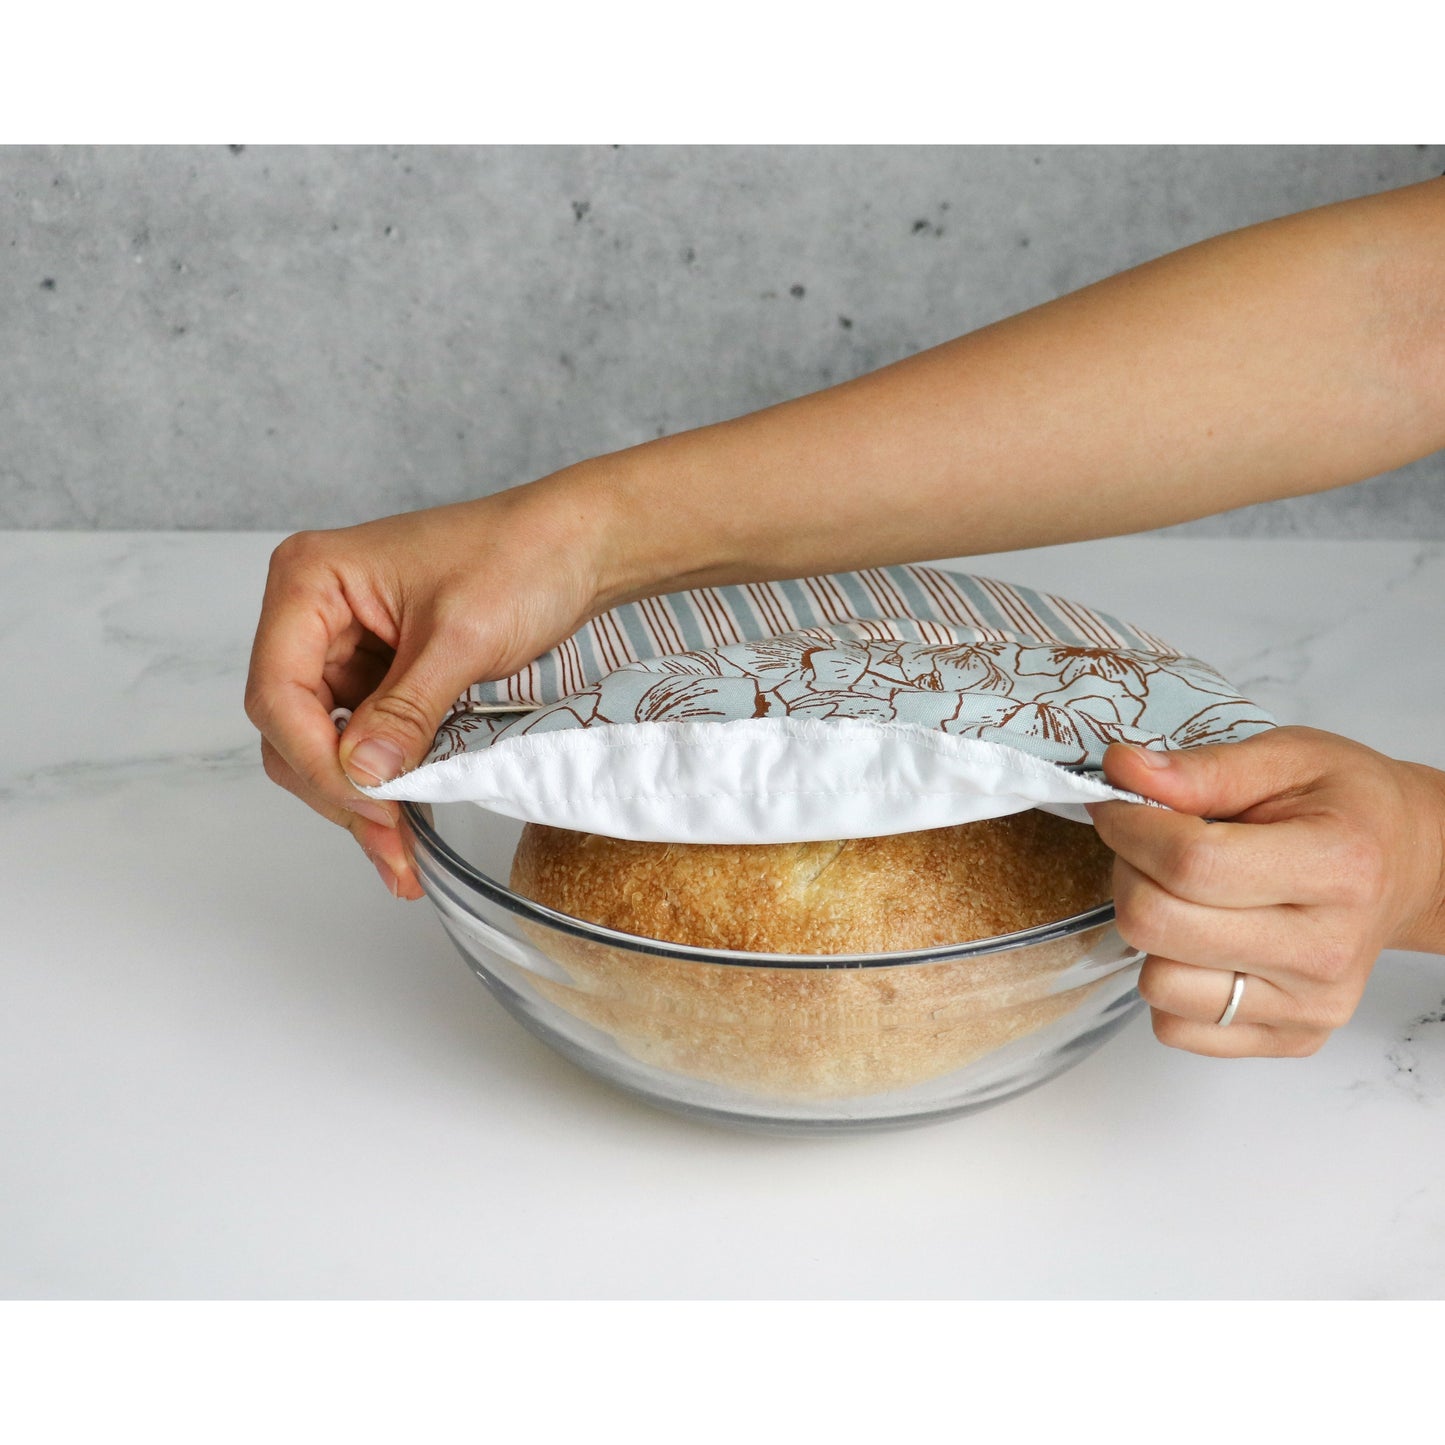 Elastic bowl covers, food container covers, stretch to fit food covers, saran wrap replacement